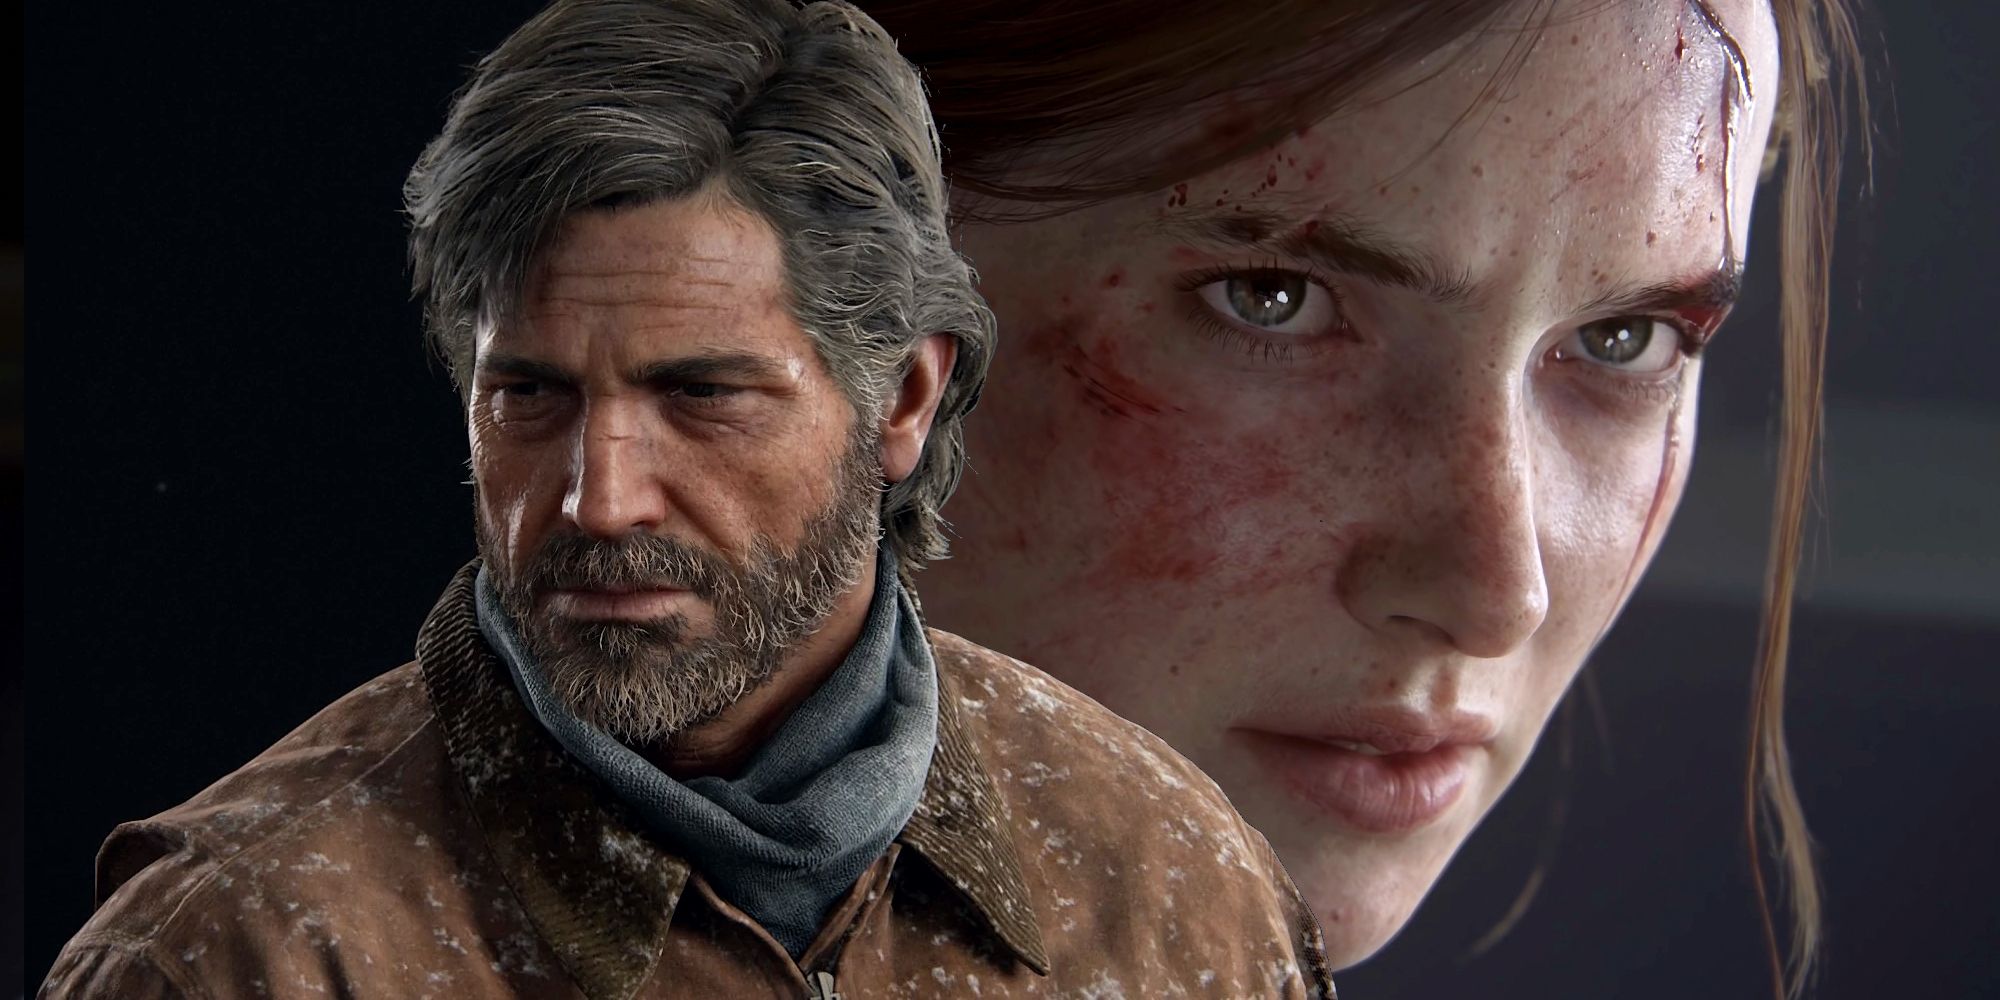 Joel from The Last of Us Part 1 looking solemn next to a close-up of Ellie from The Last of Us Part 2 looking angry with blood running from her forehead.